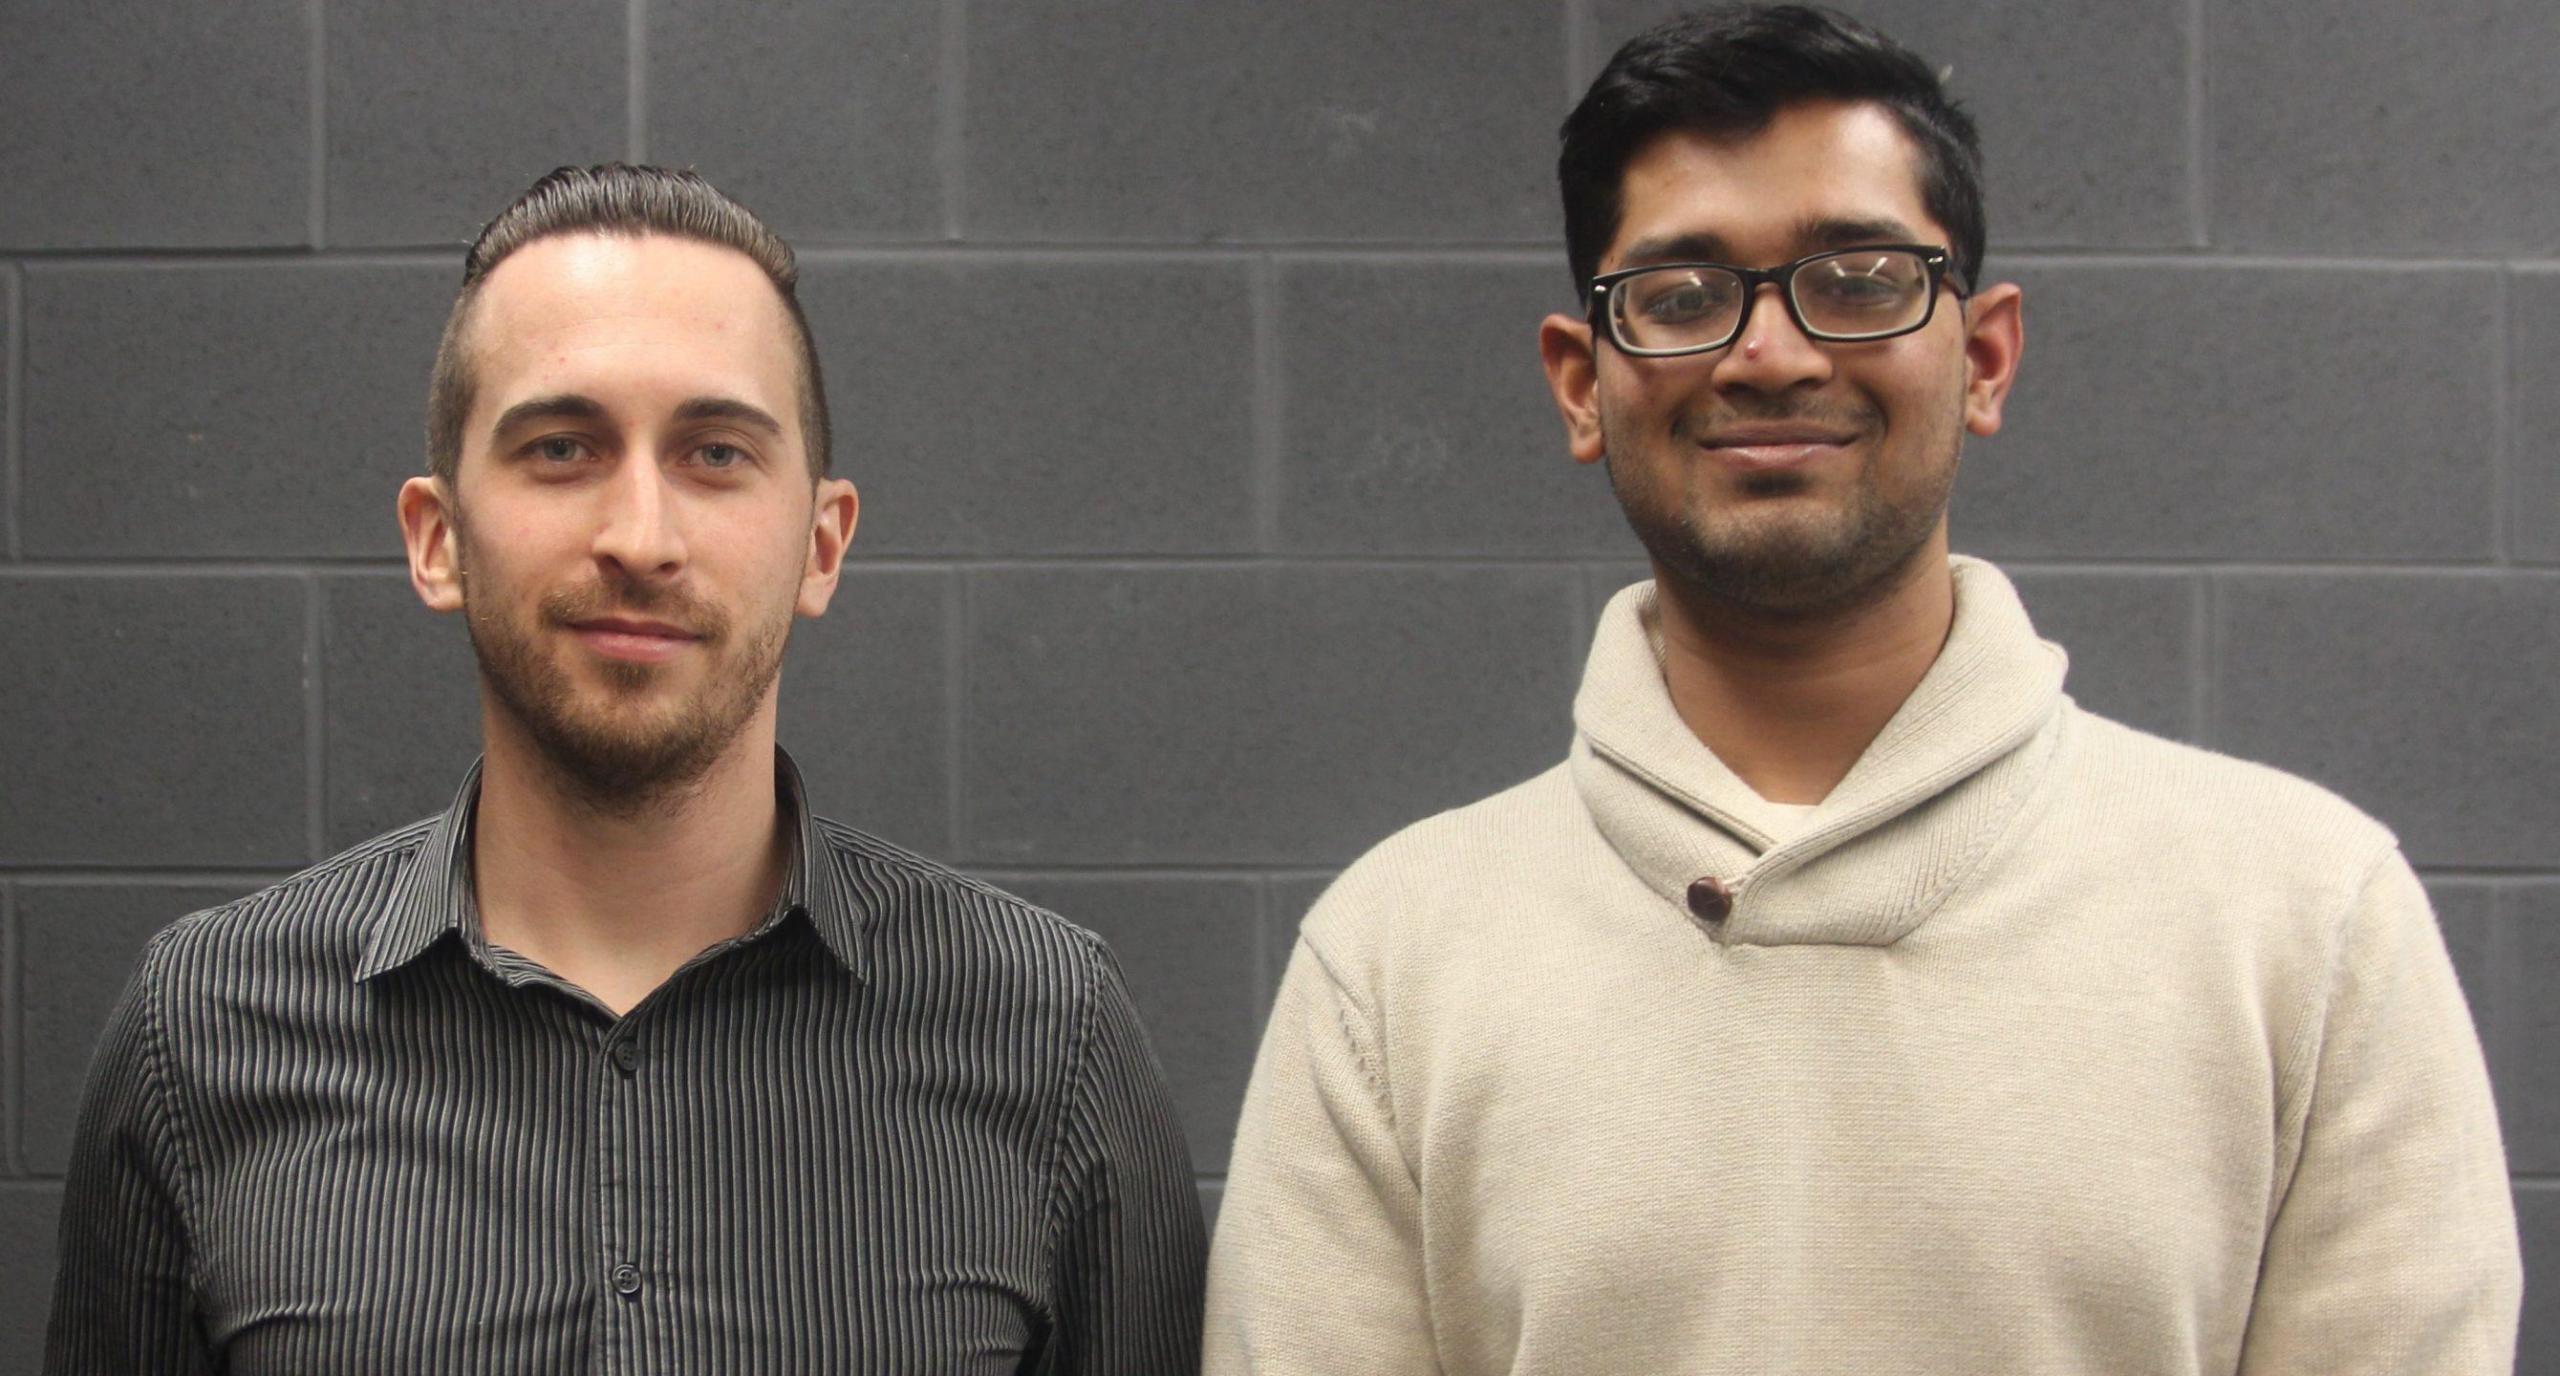 Francis Picotte, founder of the Ryerson Space Society and Abhinav Sundar, vice president of operations, stand side-by-side facing the camera.